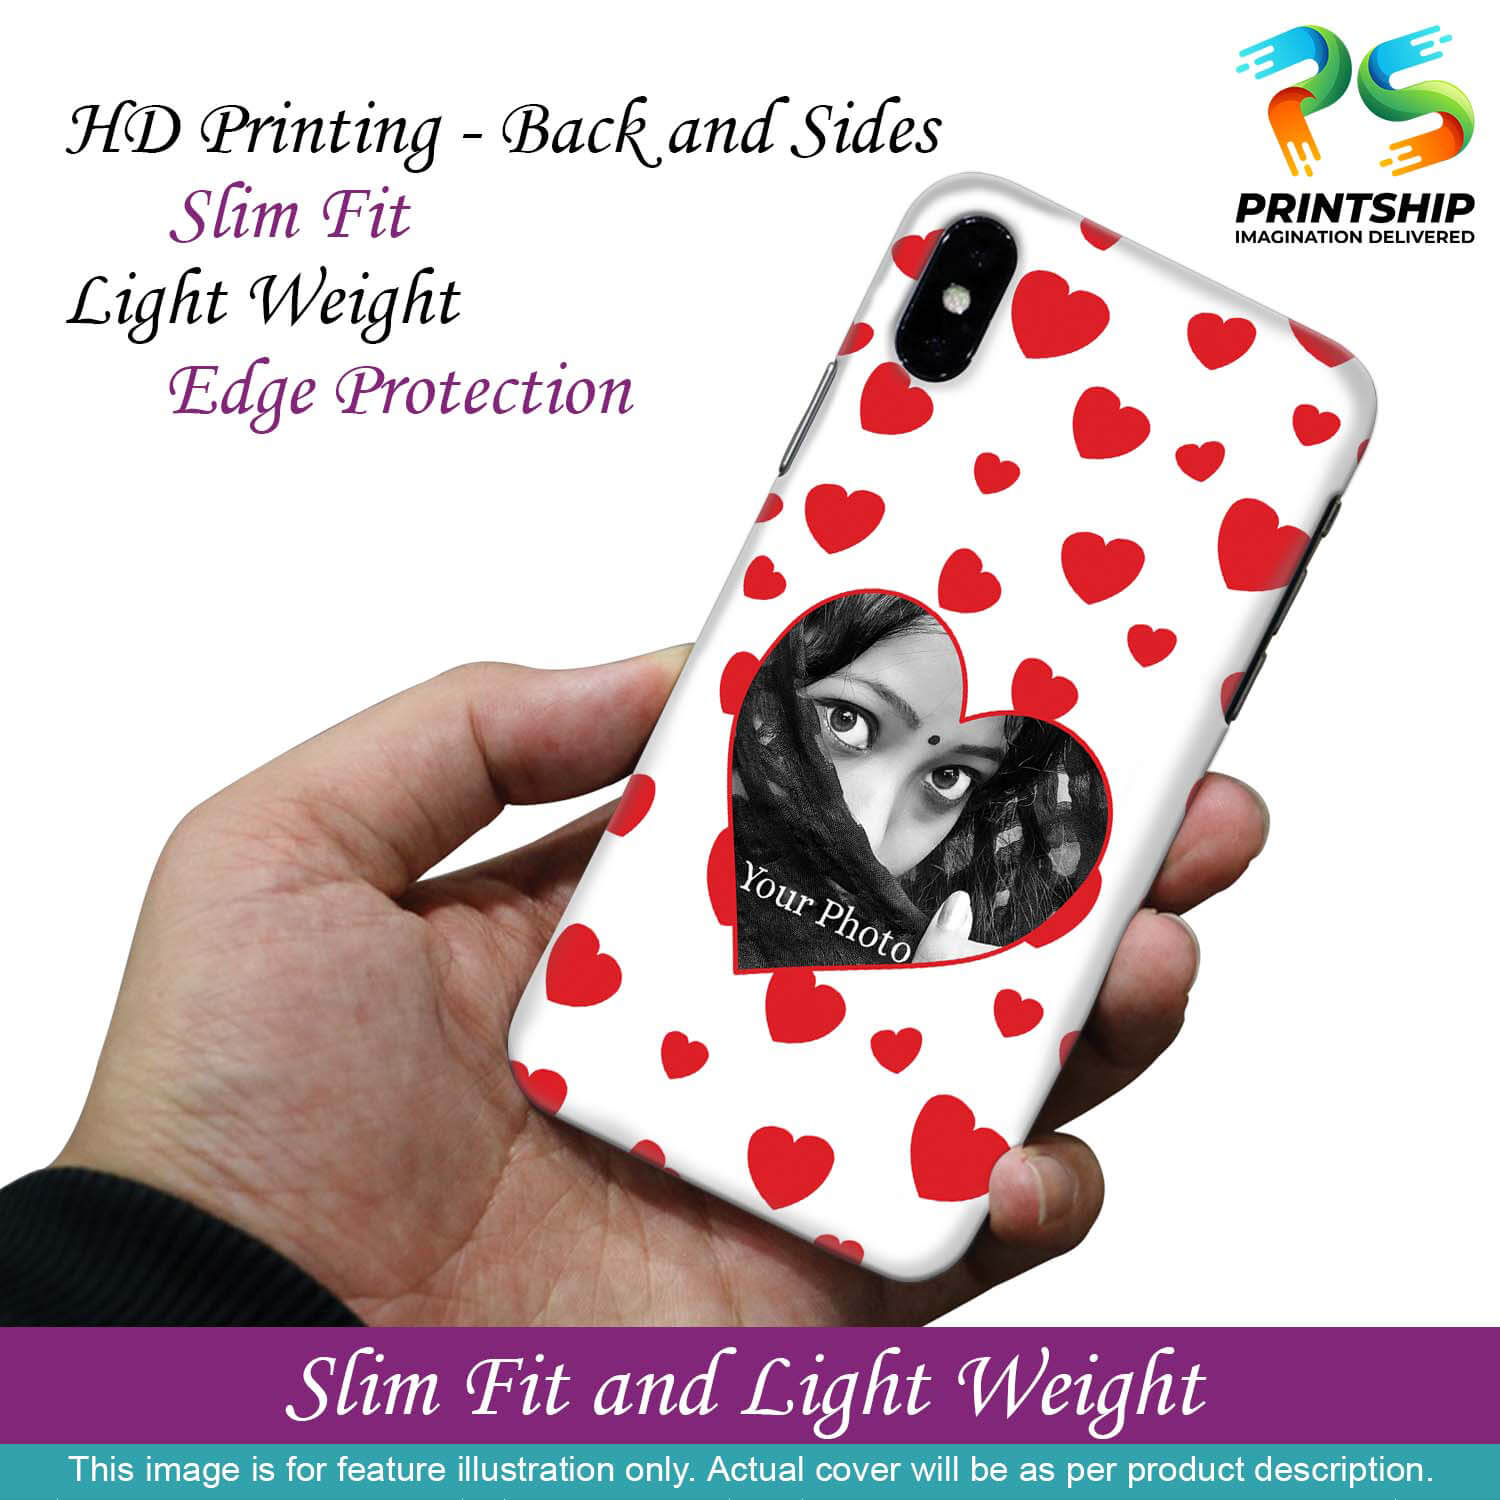 A0525-Loving Hearts Back Cover for Apple iPhone 7 Plus